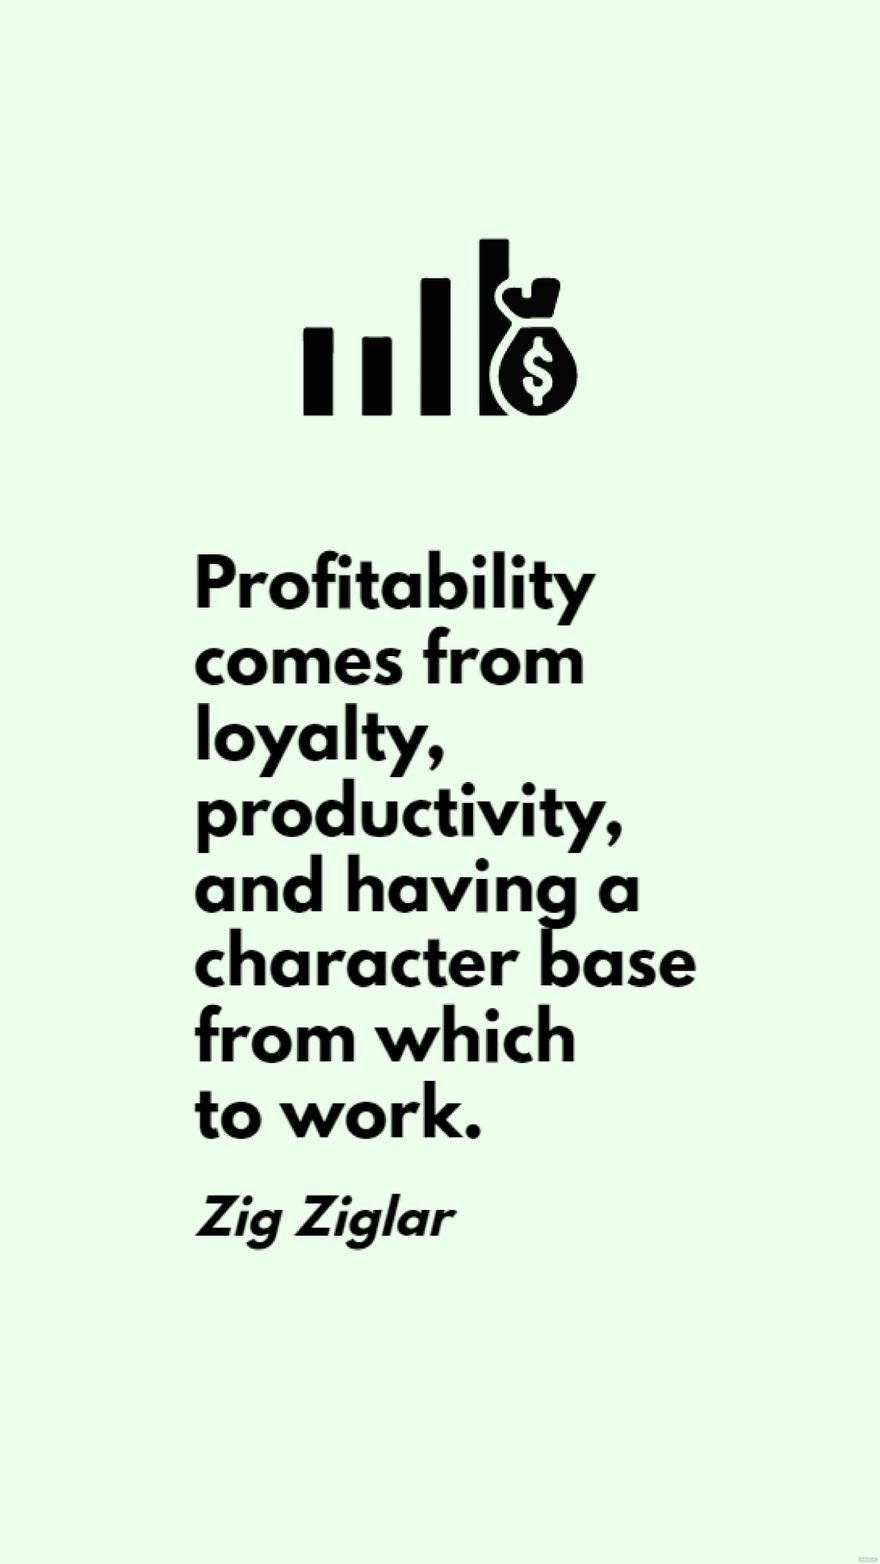 Zig Ziglar - Profitability comes from loyalty, productivity, and having a character base from which to work. in JPG